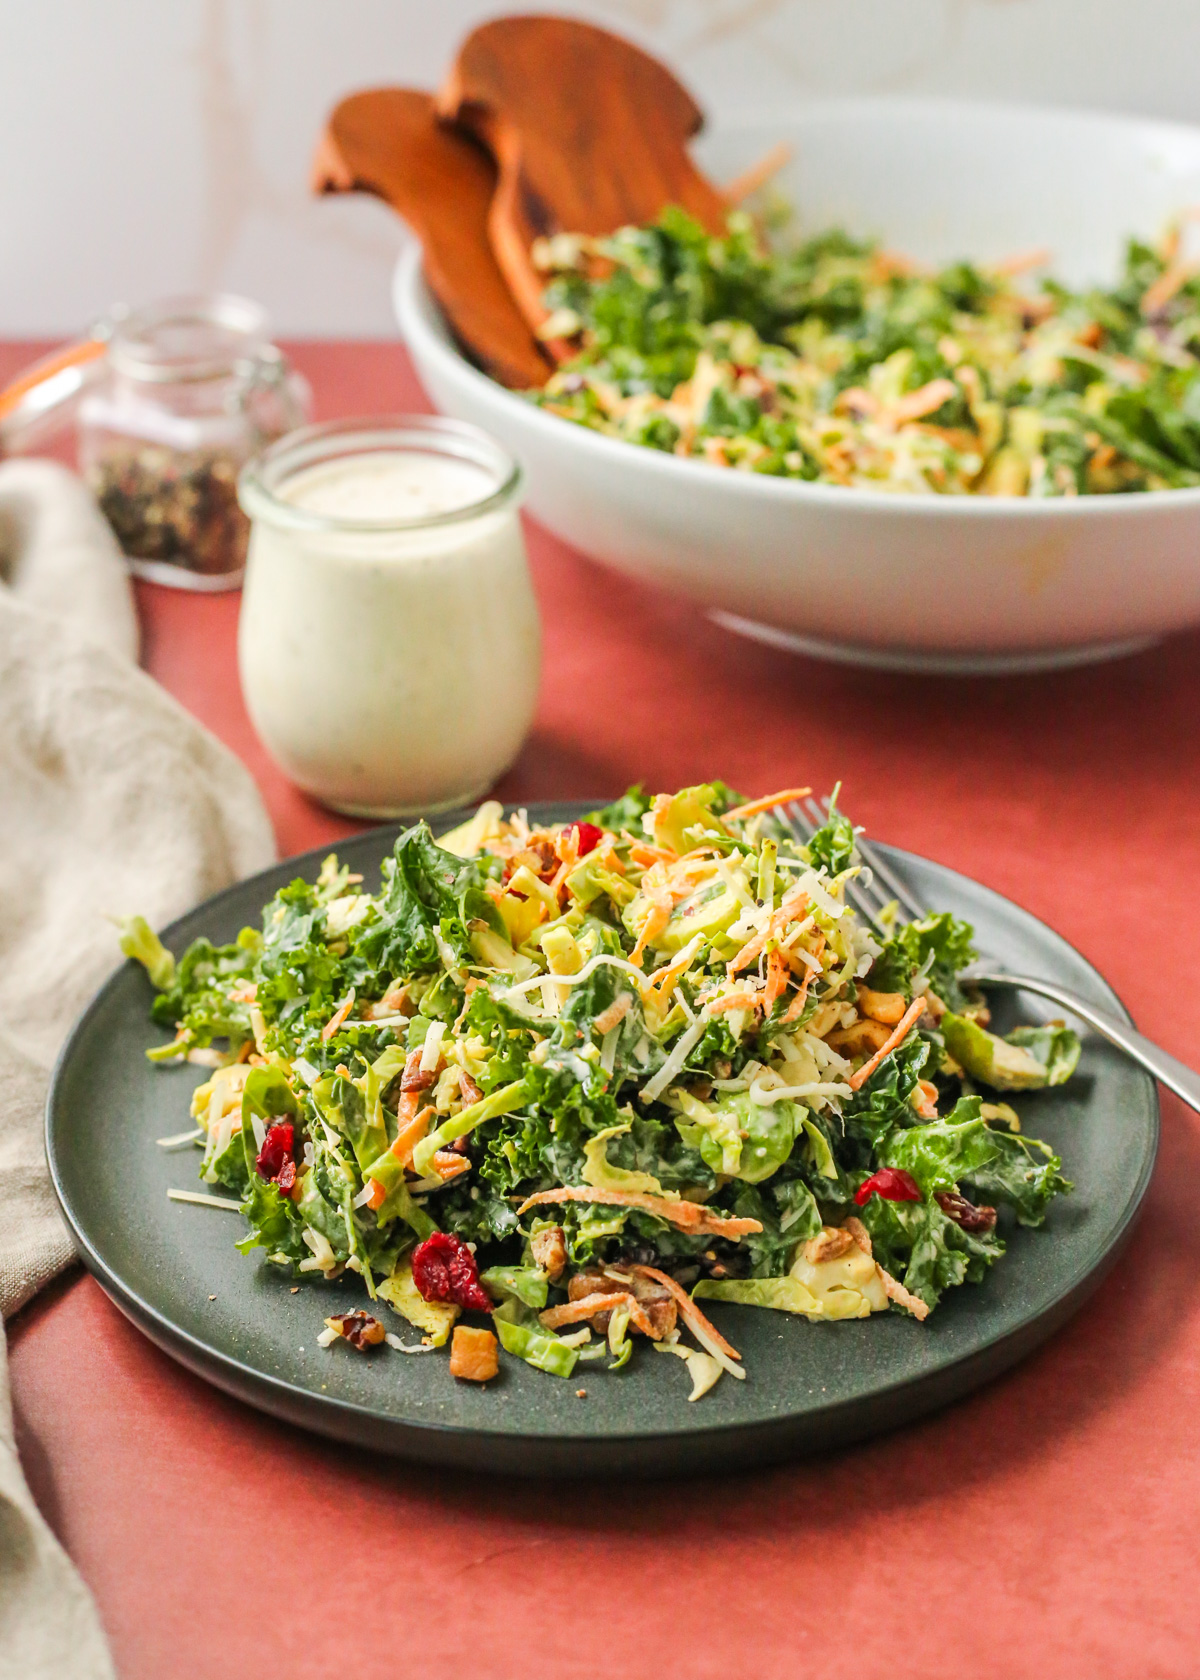 A salad made from sliced brussels sprouts, massaged kale, shredded carrots, and dried cranberries plus walnuts and pecans is tossed with a creamy dressing and served on a dark ceramic plate in front of the remaining salad bowl and extra dressing